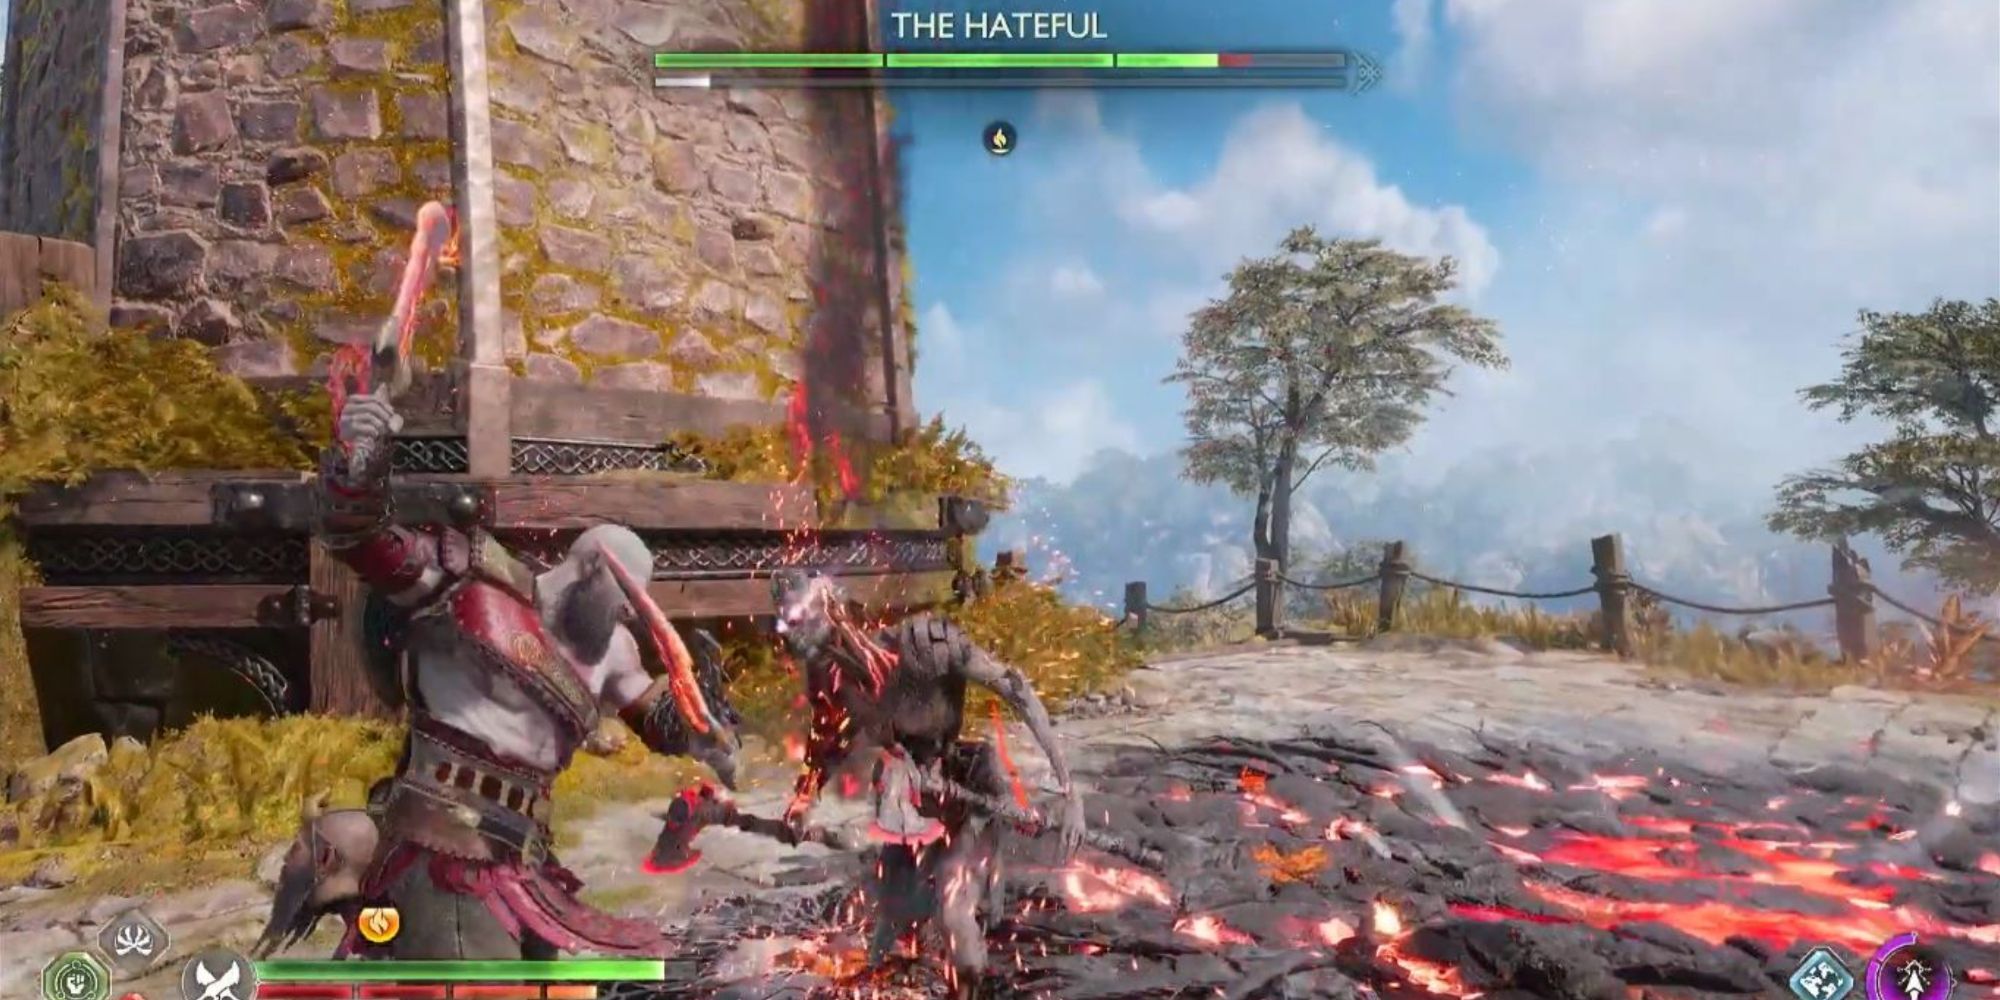 Image showing Kratos fighting The Hateful.